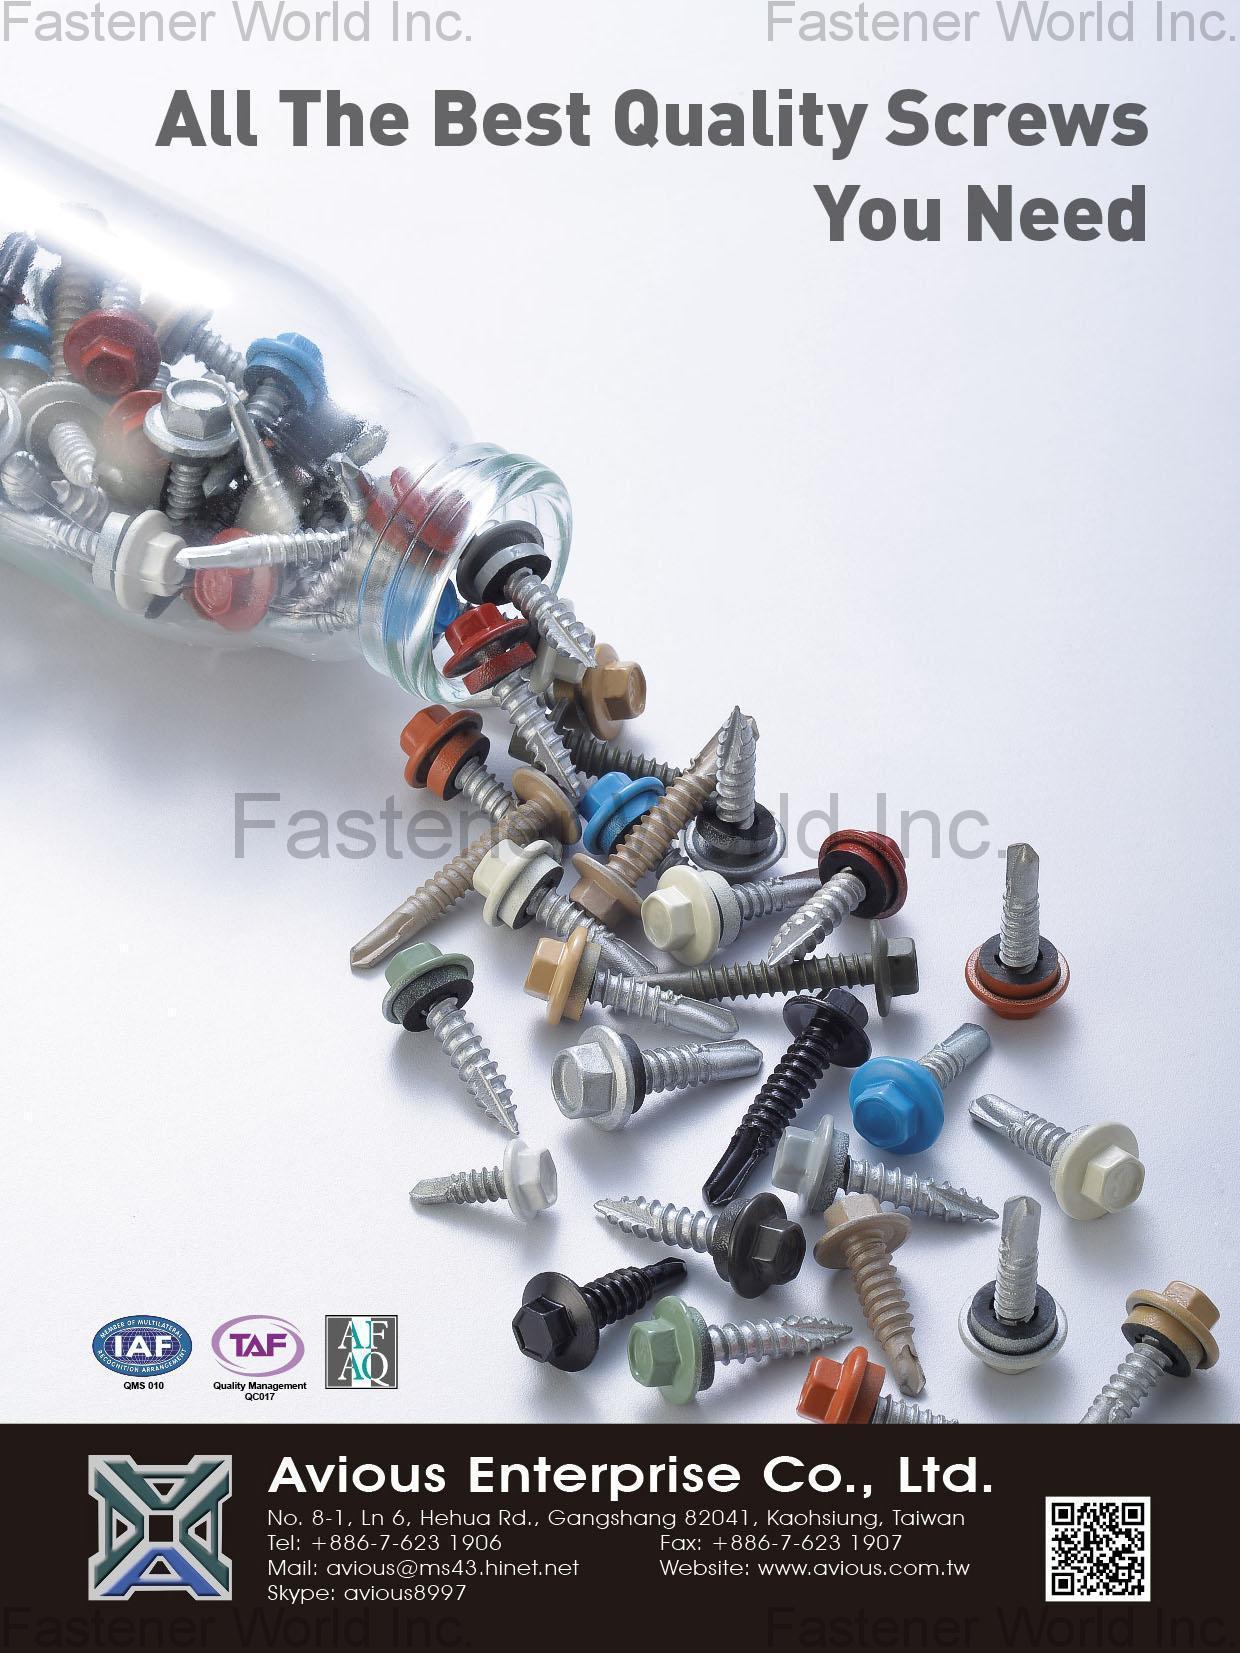 All Kinds of Screws,Seat Bolts,Stud Bolts,Machine Screws,SEMS Screws,Self-Tapping Screws,Self-drilling Screws,Collated Screws,Special Screws,Wheel Nuts,Special Nuts,Washers